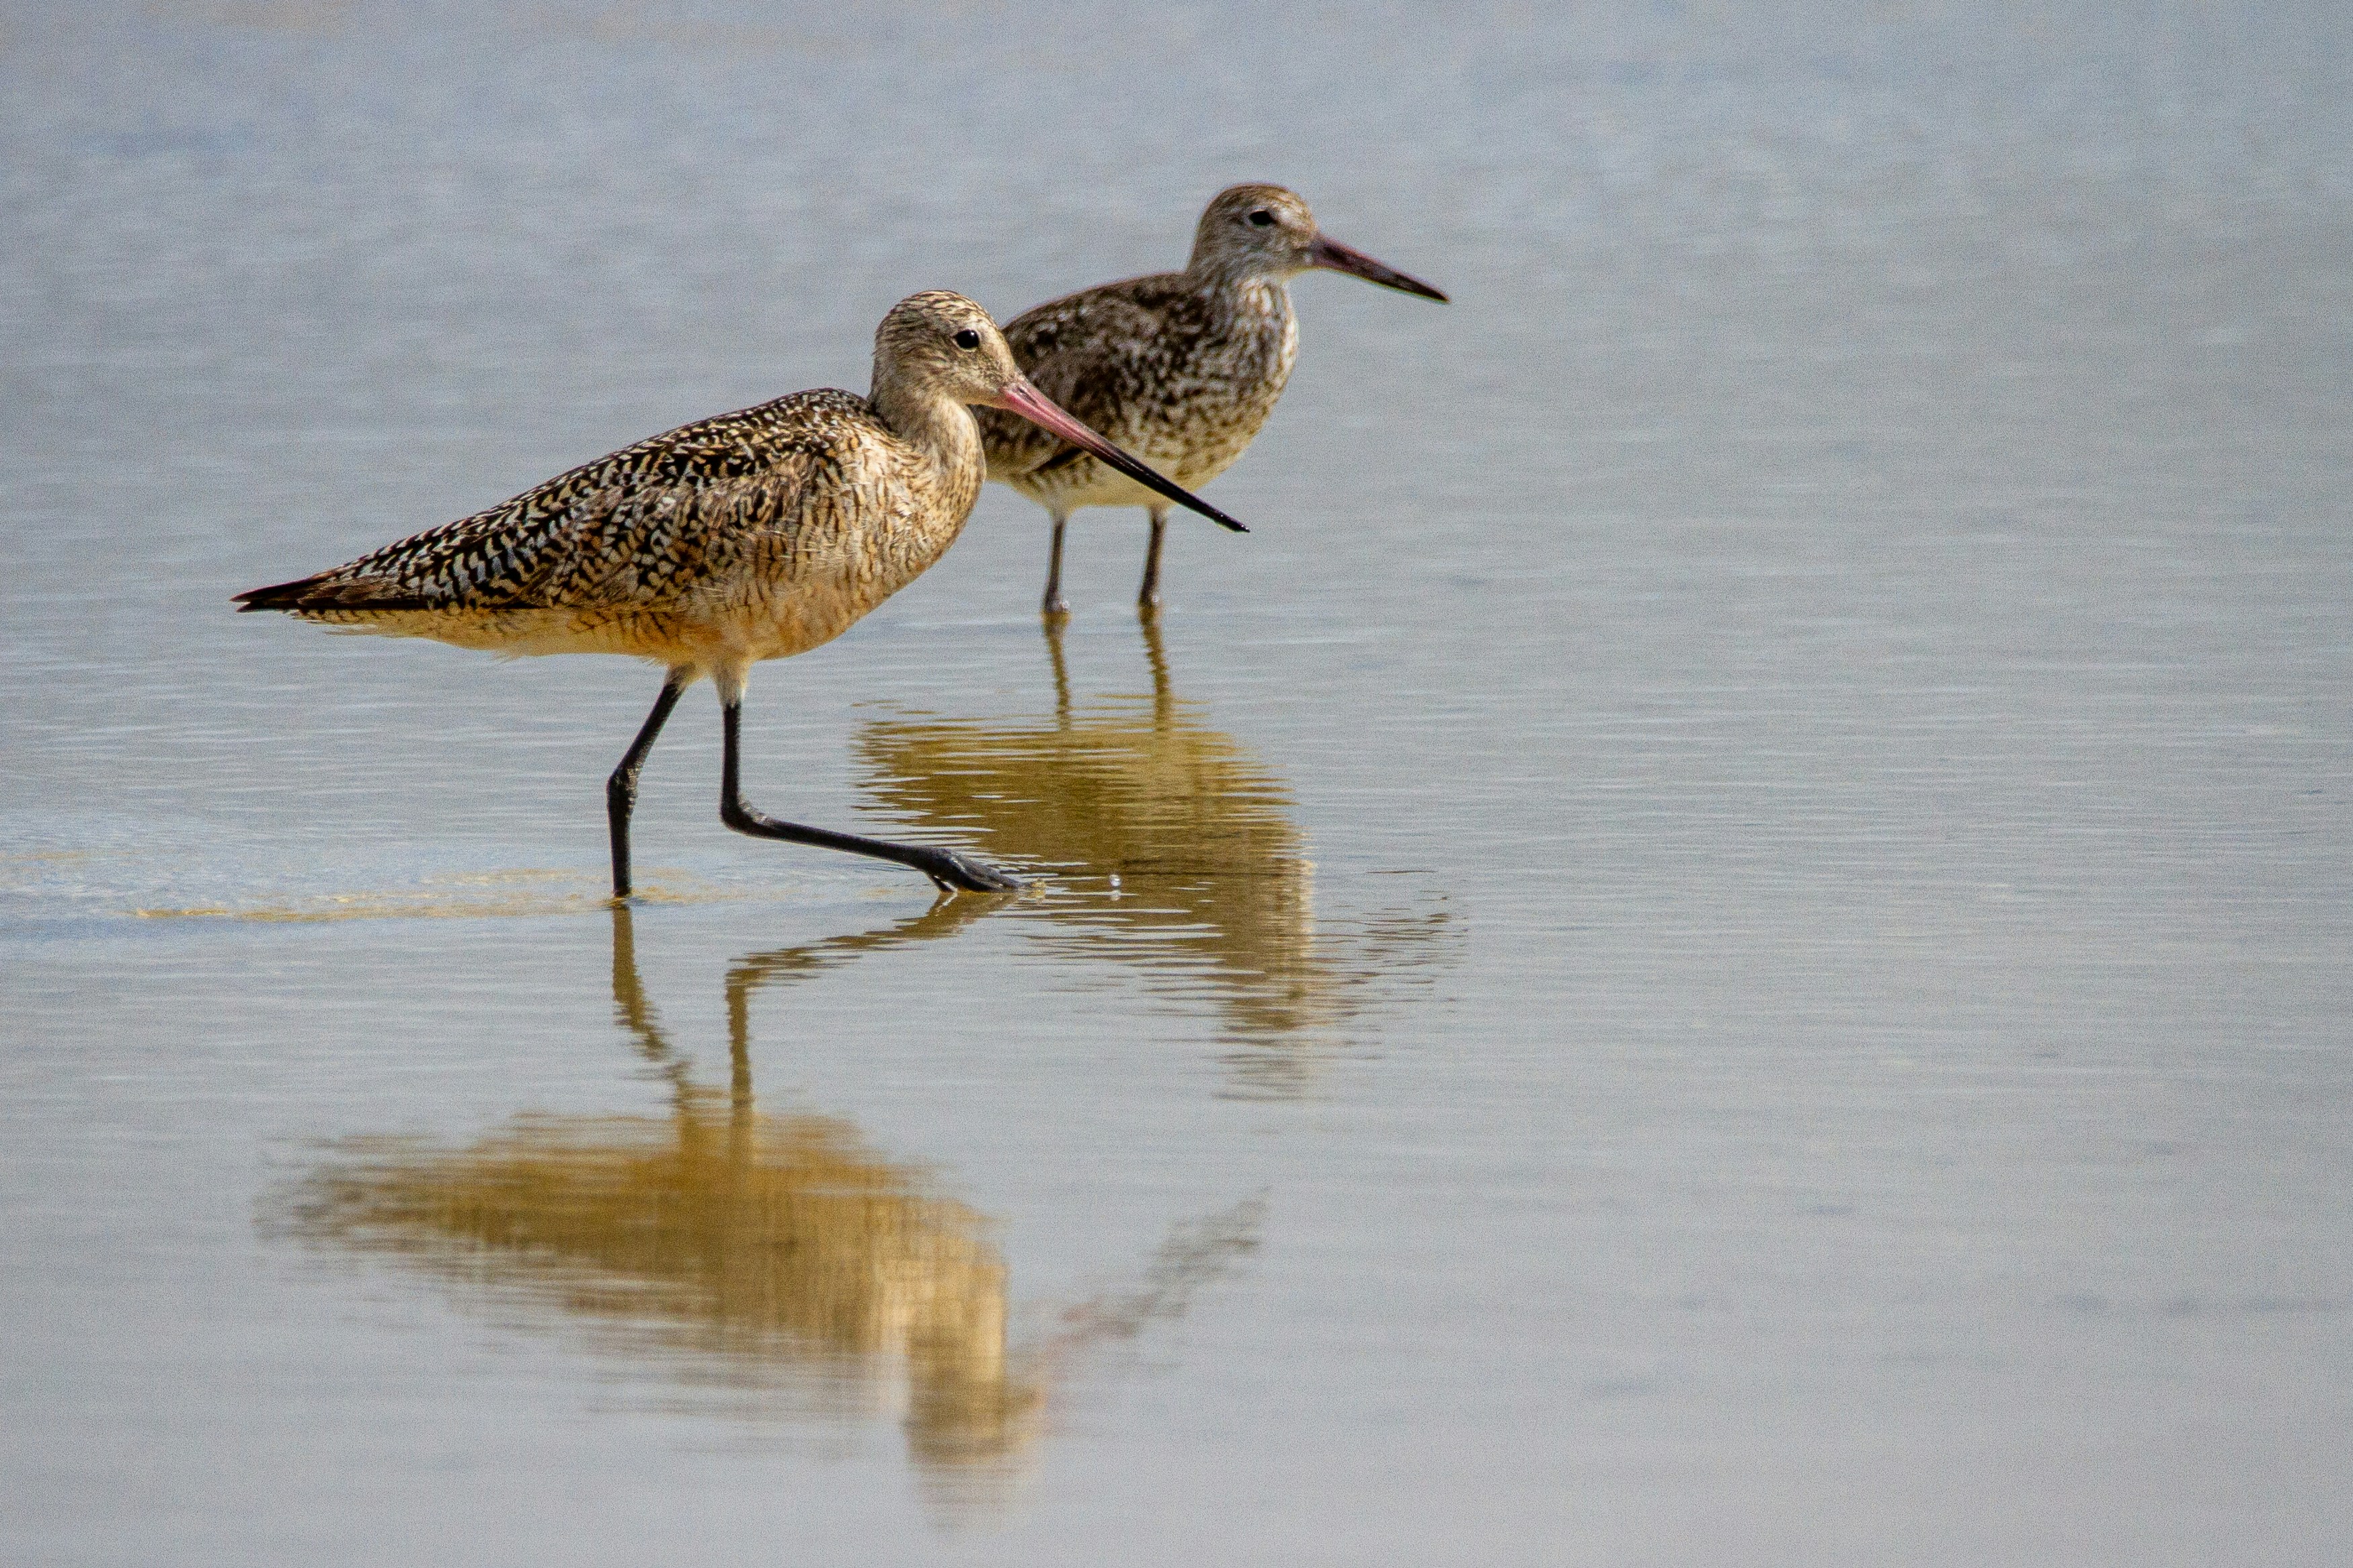 A pair of marbled godwits in the shallow water.